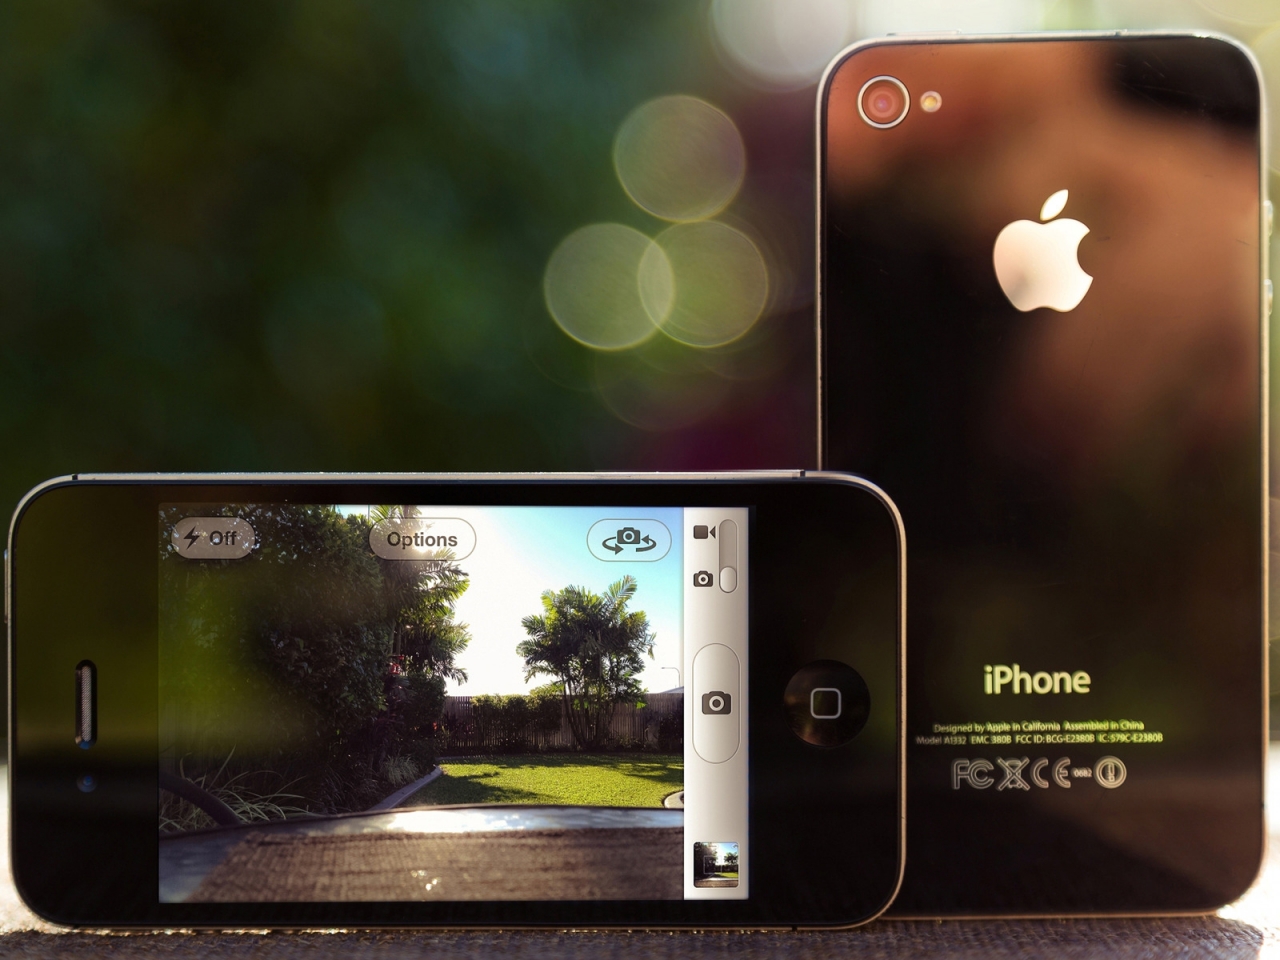 iPhone 4 for 1280 x 960 resolution